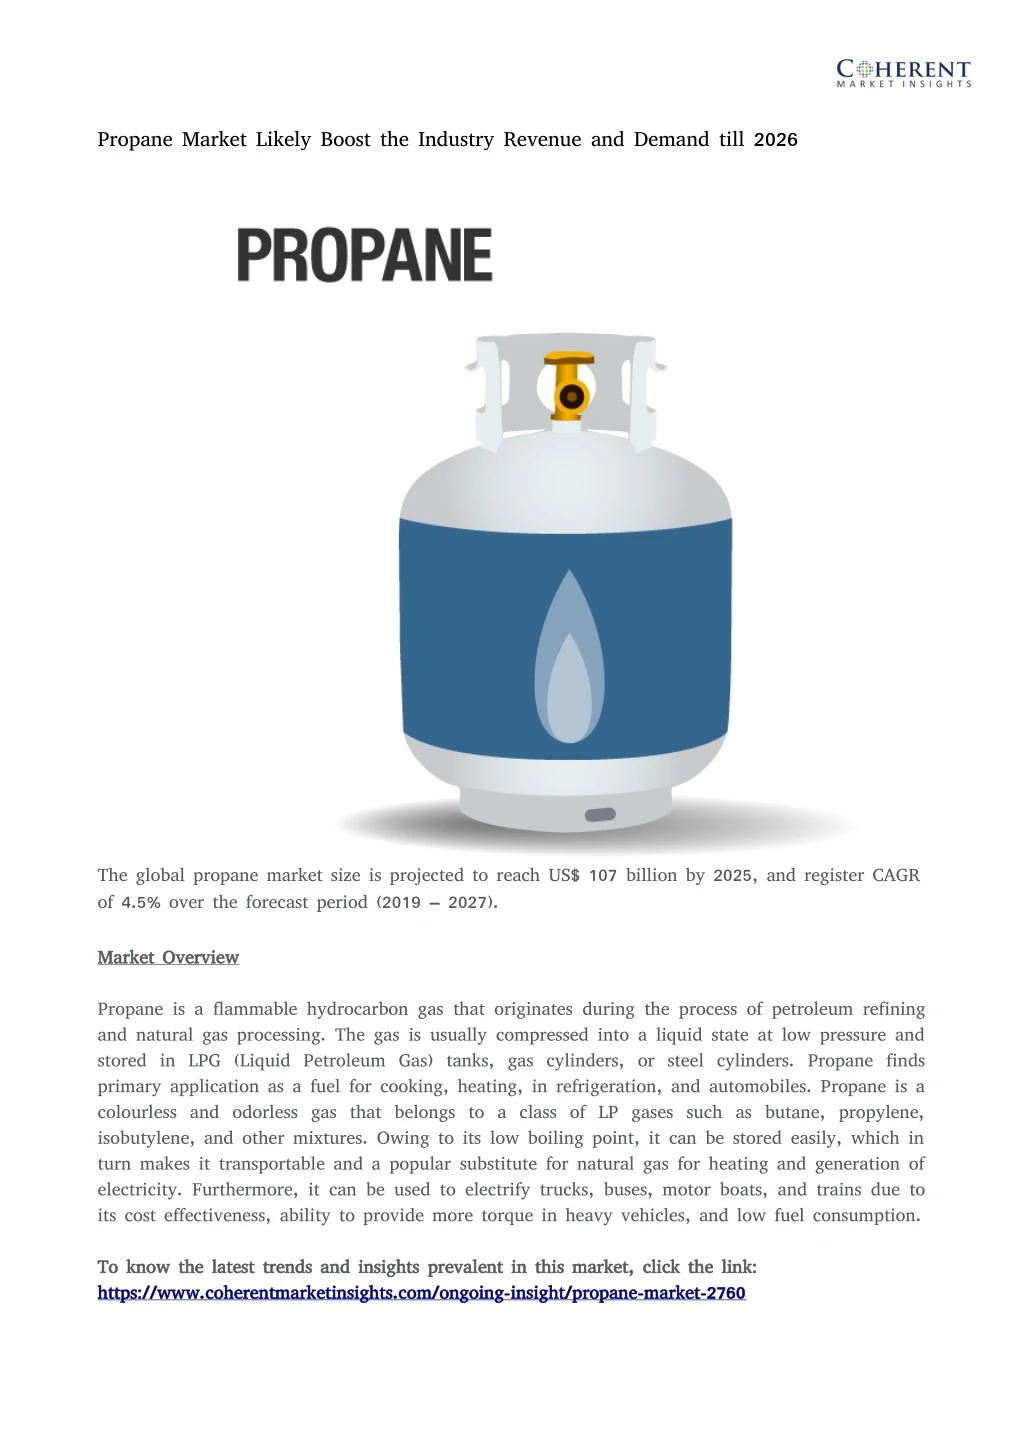 propane market likely boost the industry revenue